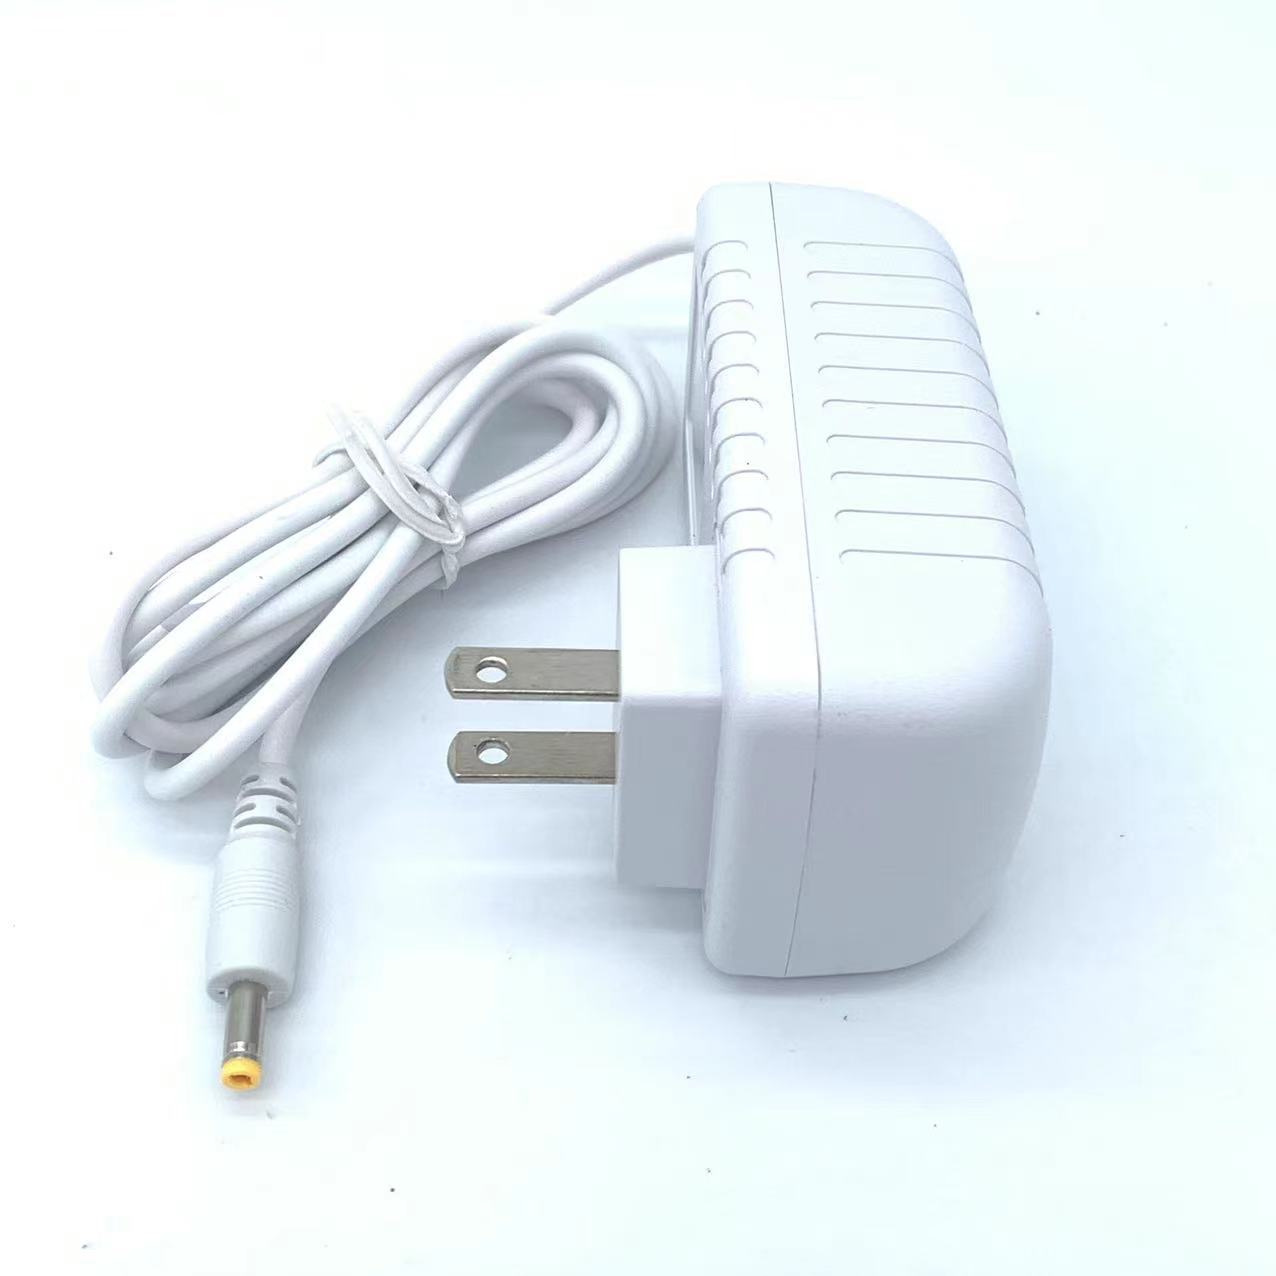 Suitable for Yameng Power Supply YAMAN Beauty Instrument Charger HRF-10T/11T/PLUS/pro Model Charger input:100-240v 50-60